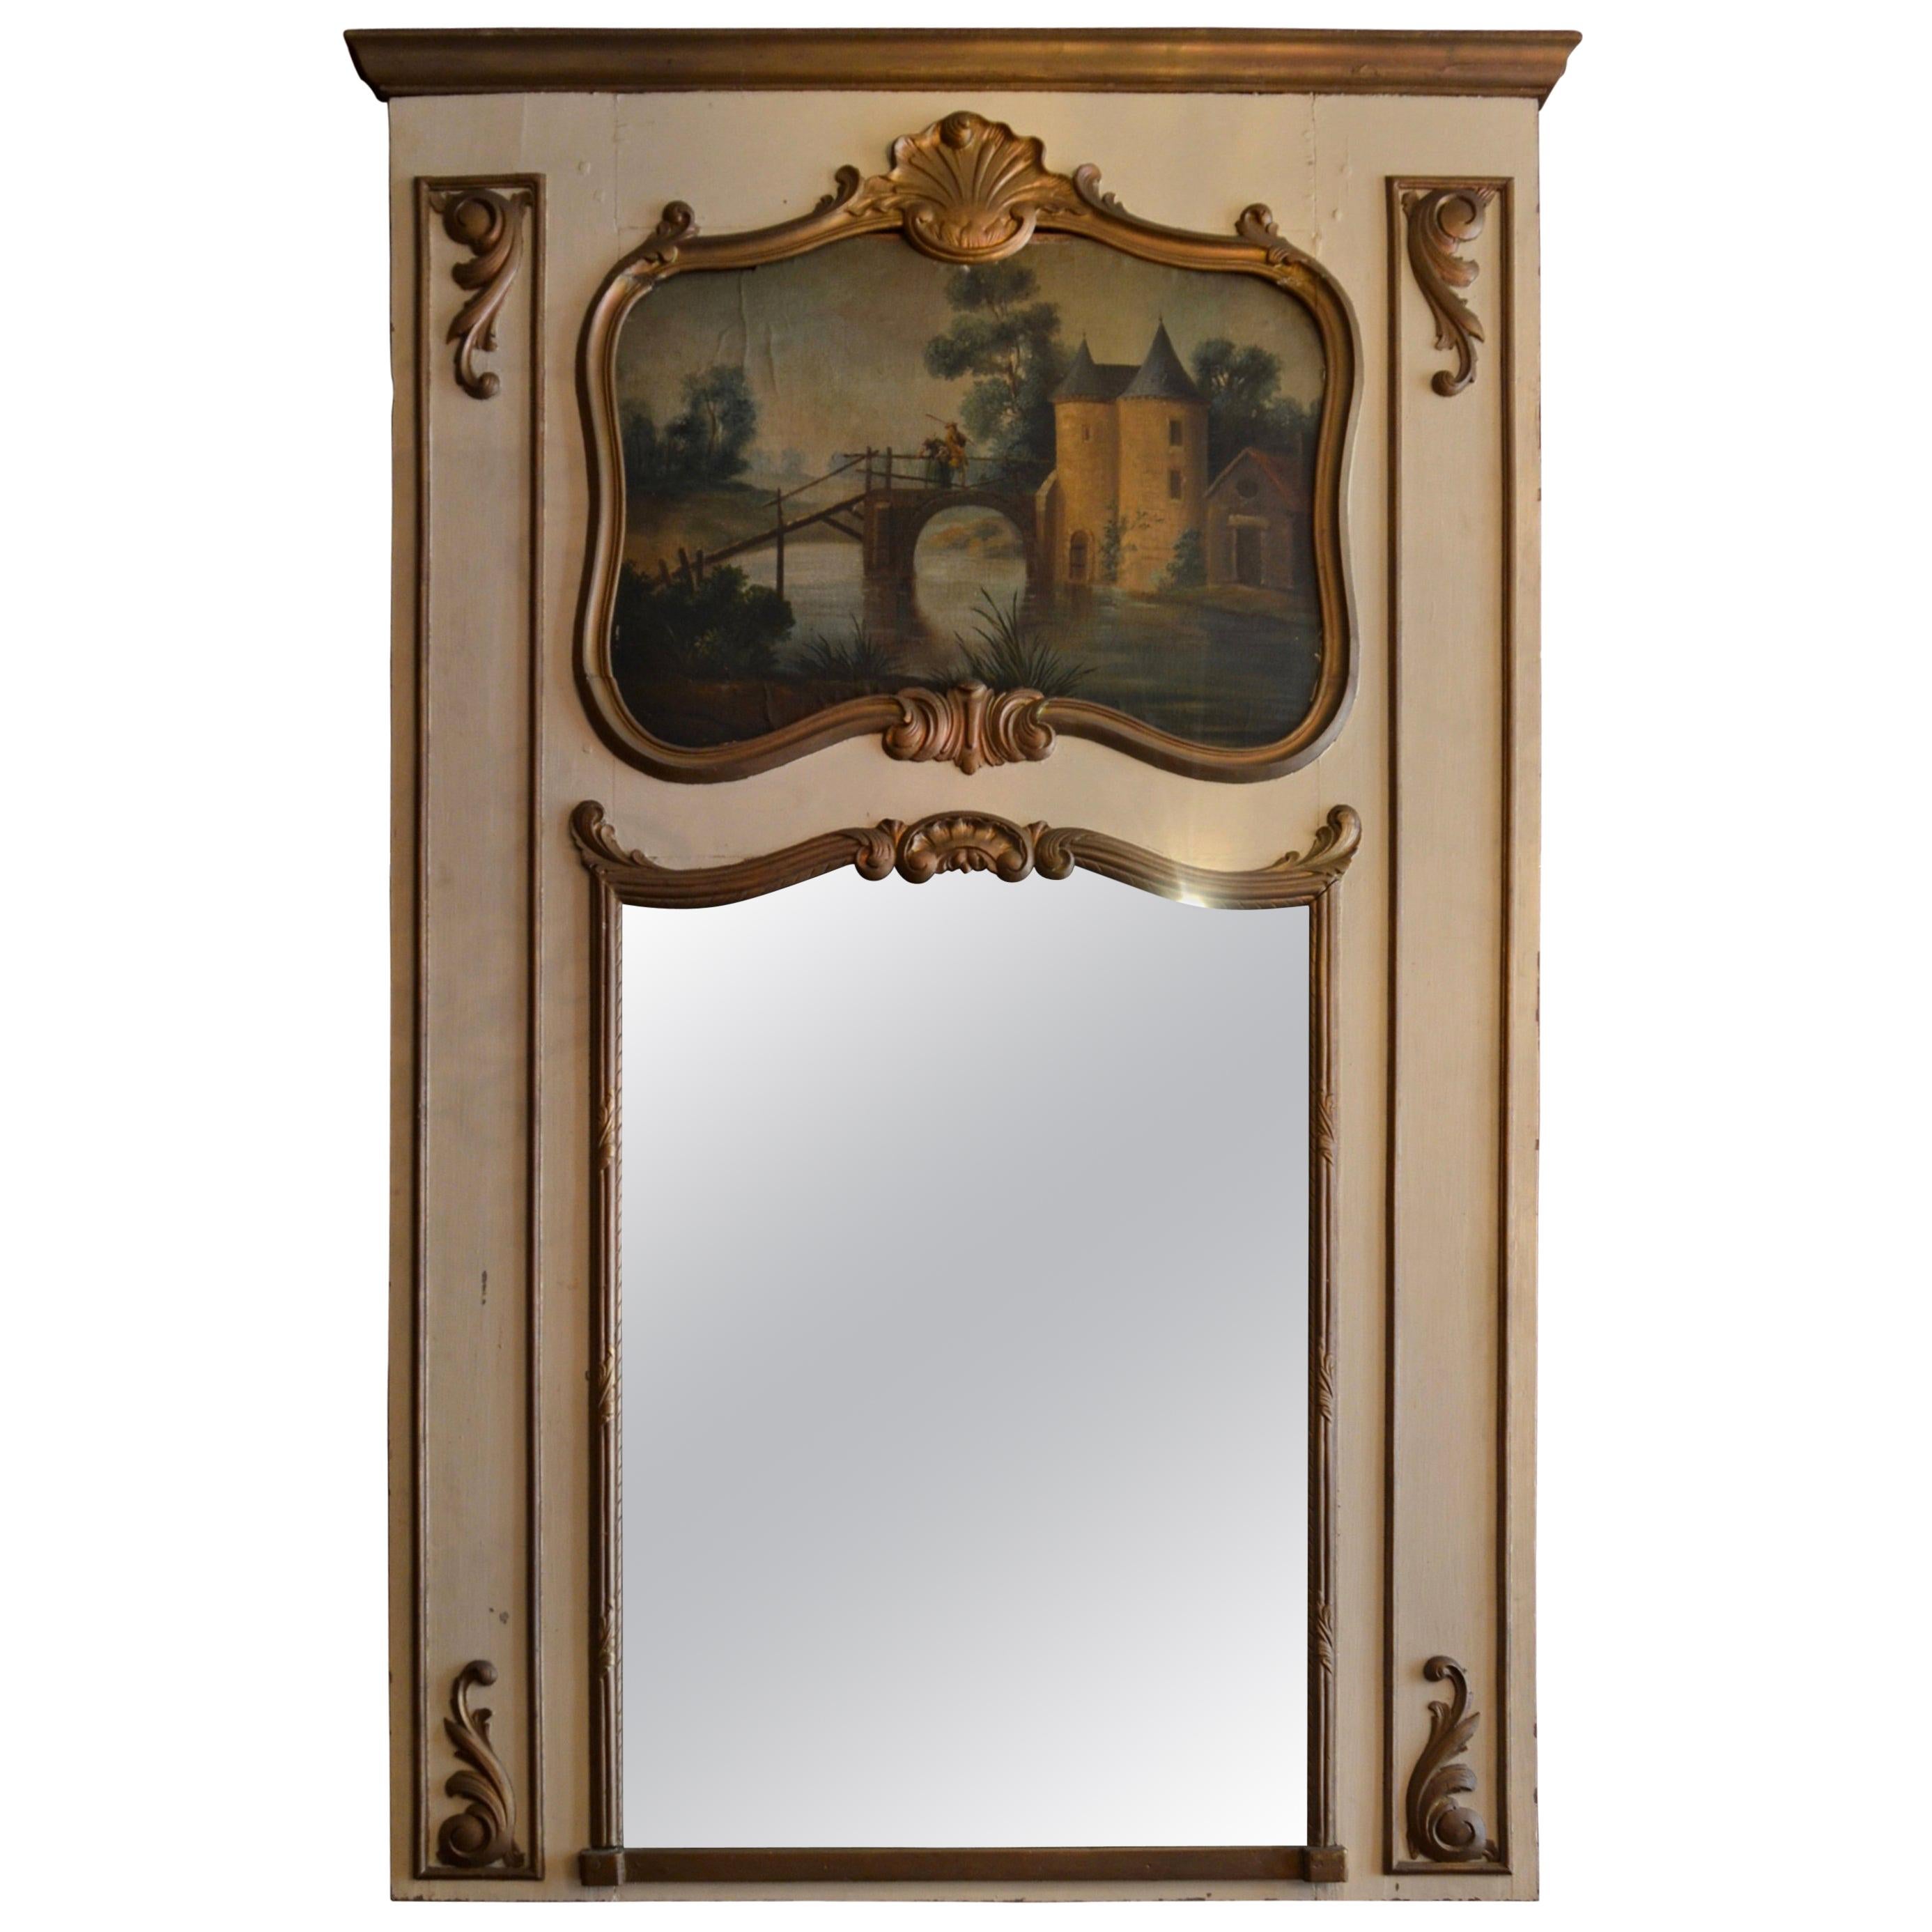 Antique French Wood Trumeau Mirror with Multi-Color Landscape Scene